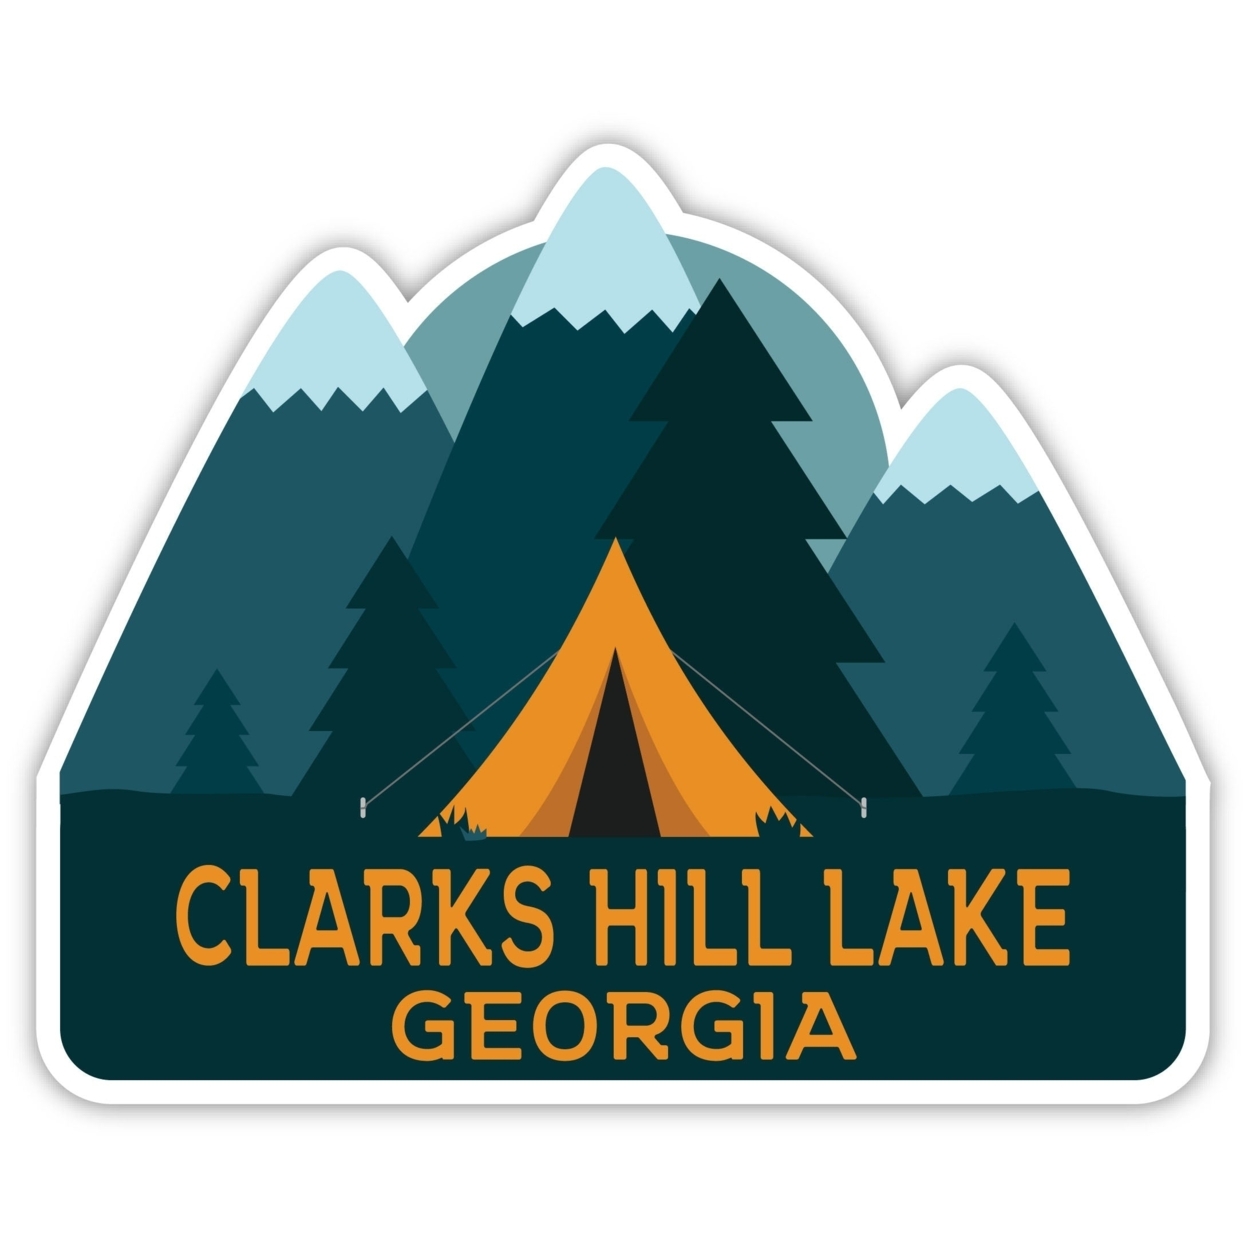 Clarks Hill Lake Georgia Souvenir Decorative Stickers (Choose Theme And Size) - Single Unit, 2-Inch, Great Outdoors